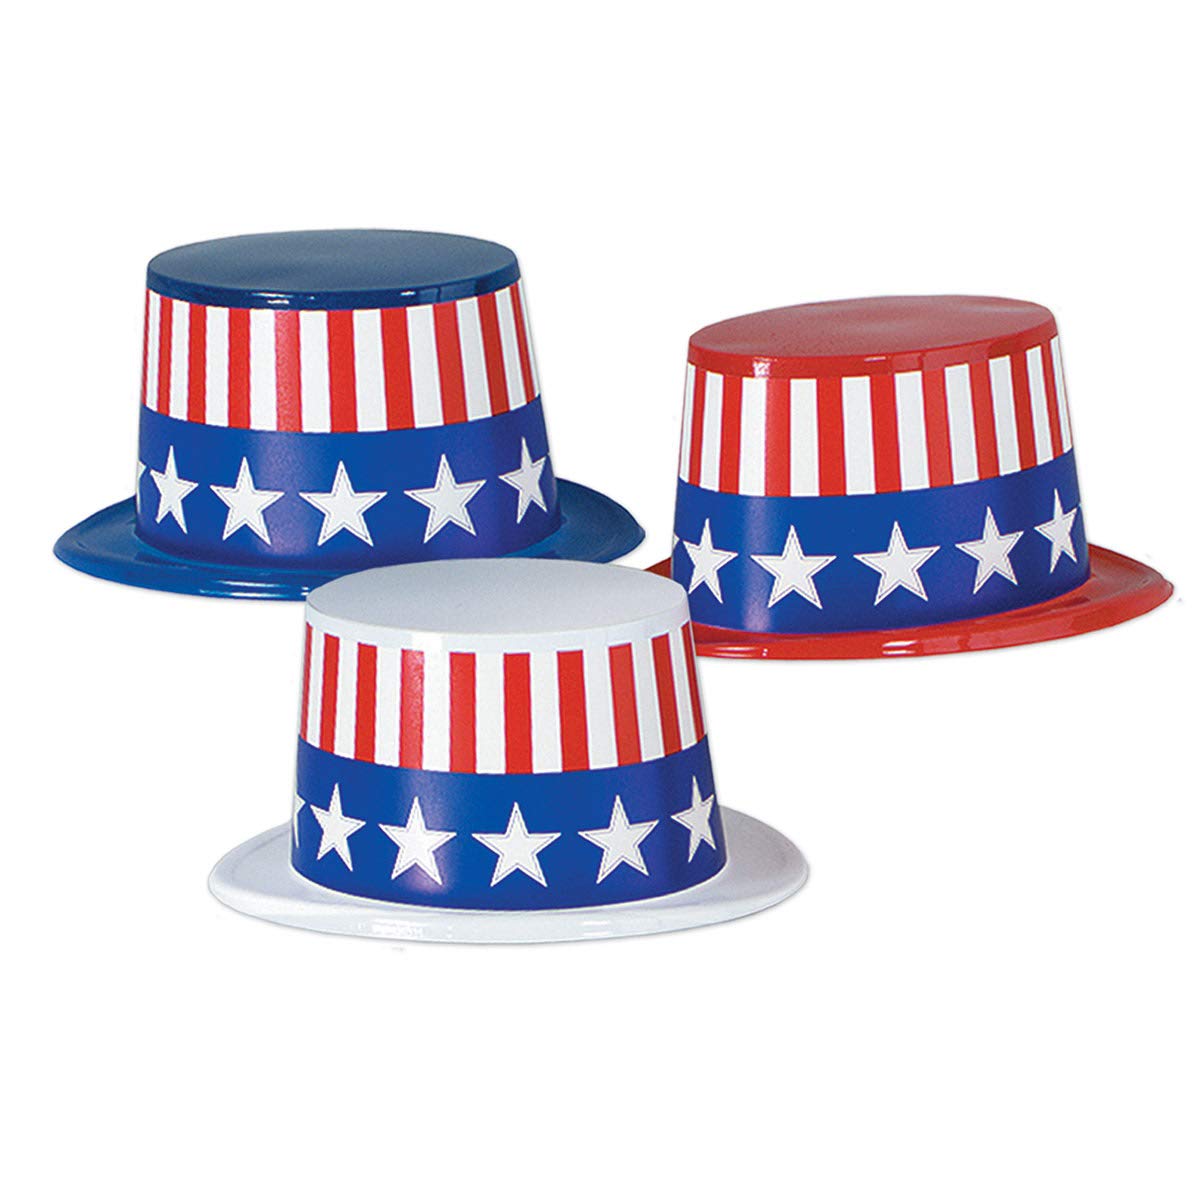 Beistle 66629-25 25-Pack Plastic Toppers with Patriotic Band, Assorted Red/White/Blue, One Size